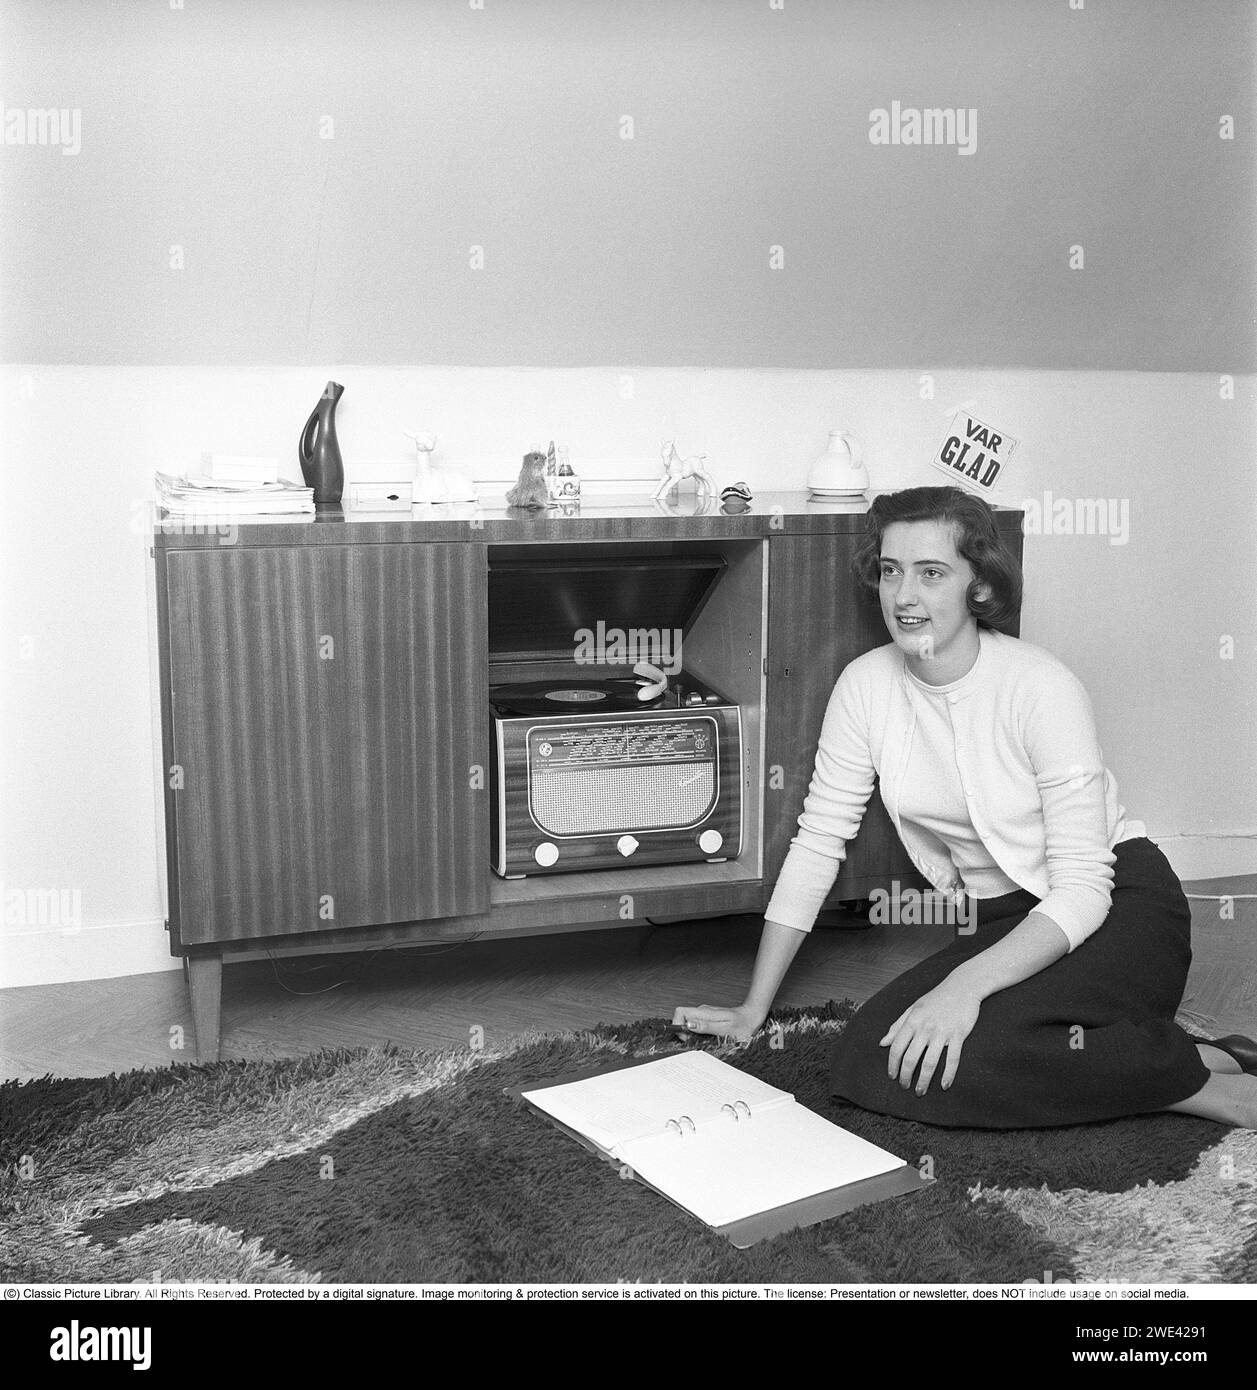 In the 1950s. A radio gramophone from the manufacturer Centrum radio. A combined piece of music furniture where a gramophone and radio were put together. The model became popular in the 1950s. The construction made them big and heavy, with more lavish details in the wooden construction. A young woman sits on the floor and listens to the music. Be happy reads the text on the sign on the wall. Sweden 1956. Svahn ref SVA1 Stock Photo